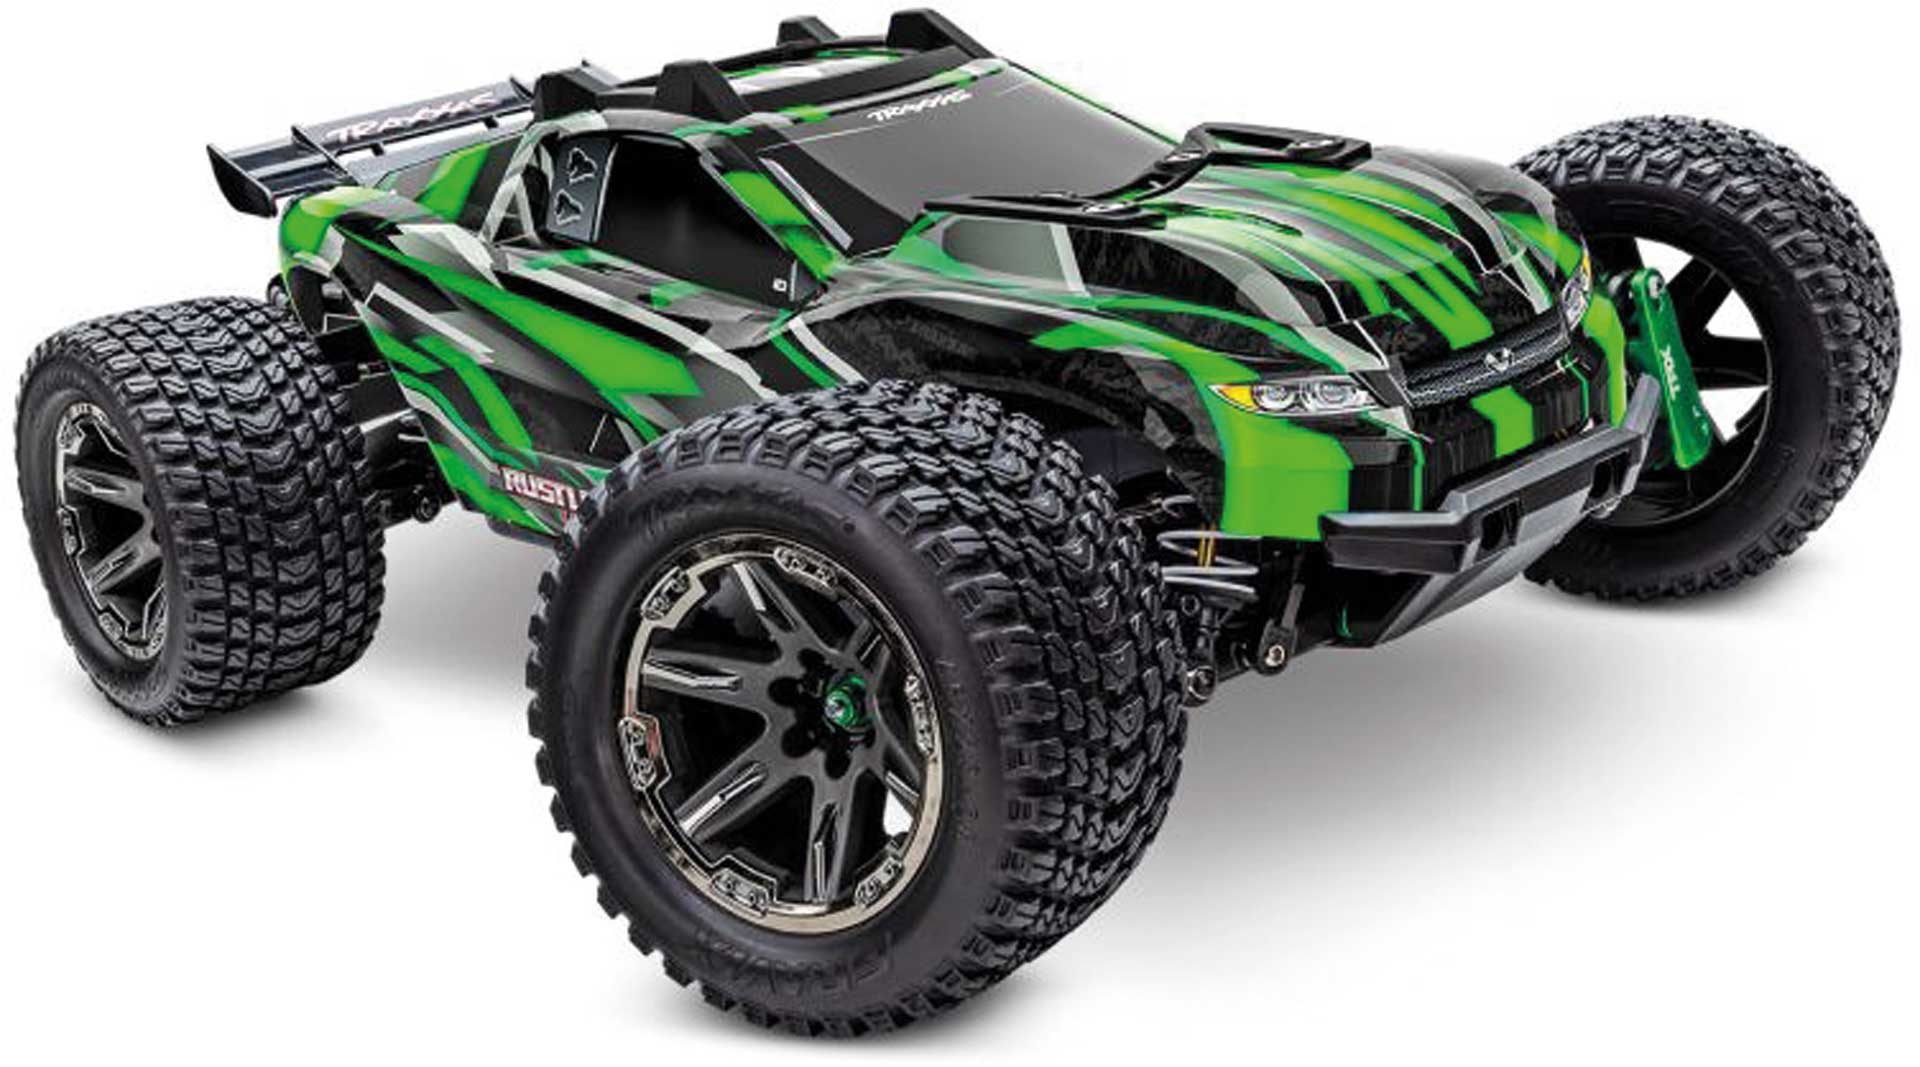 TRAXXAS RUSTLER 4X4 VXL ULTIMATE GREEN 1/10 STADIUM TRUCK RTR BRUSHLESS WITHOUT BATTERY AND CHARGER, WITH CLIPLESS